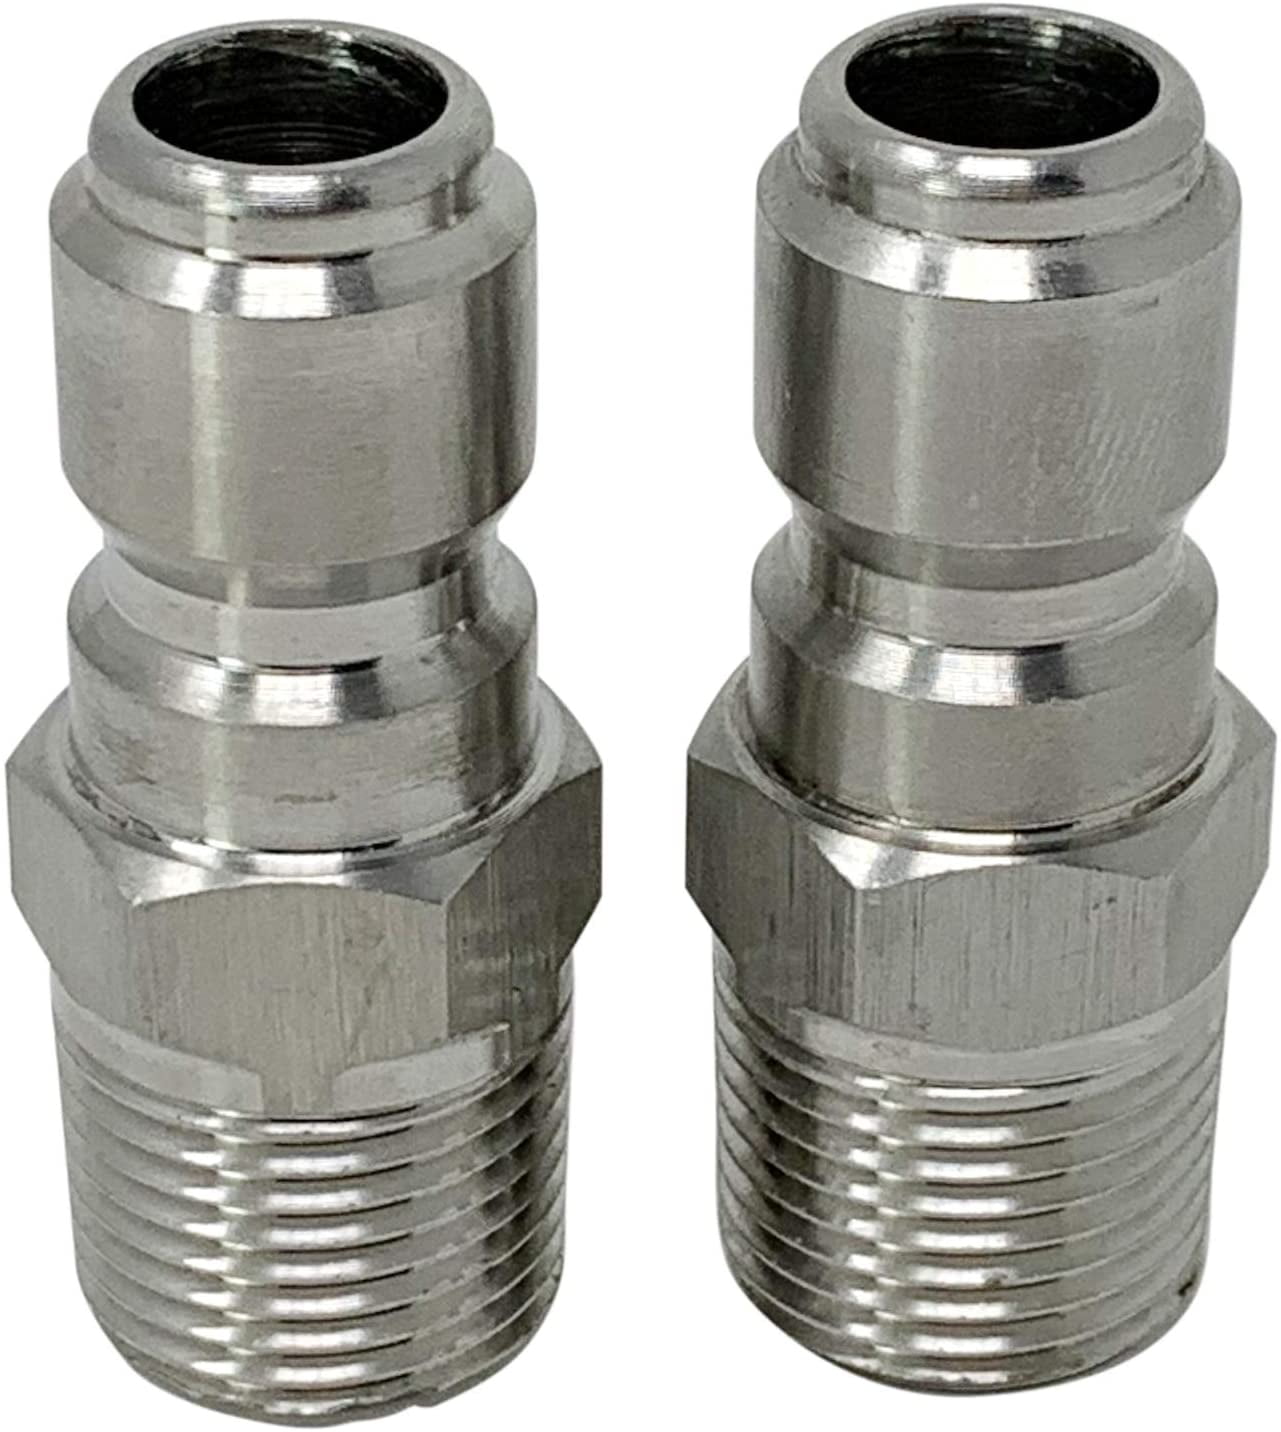 Pressure Washer & Hydraulic F To M Plated Steel Coupling Size 3/8" x 3/8" 